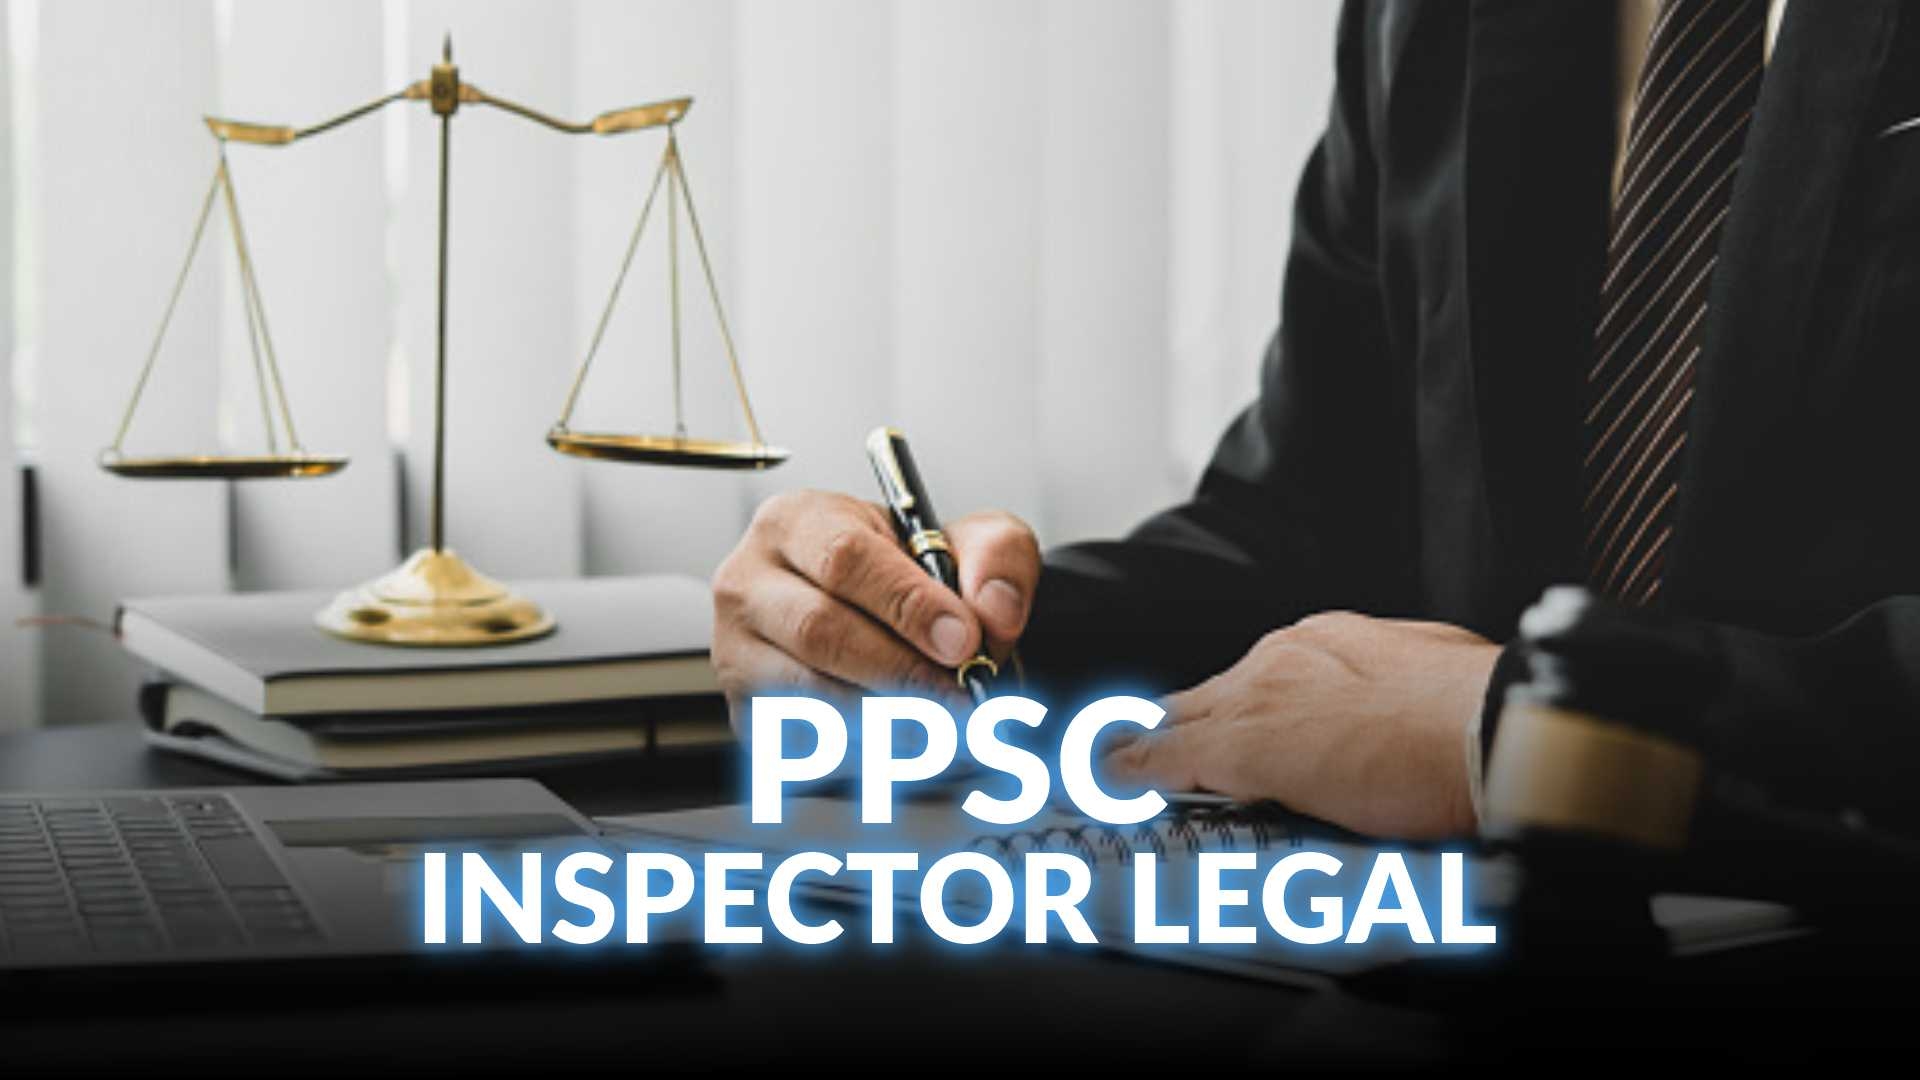 PPSC Inspector Legal BS-16 (Specialist CADRE) Test Preparation Course